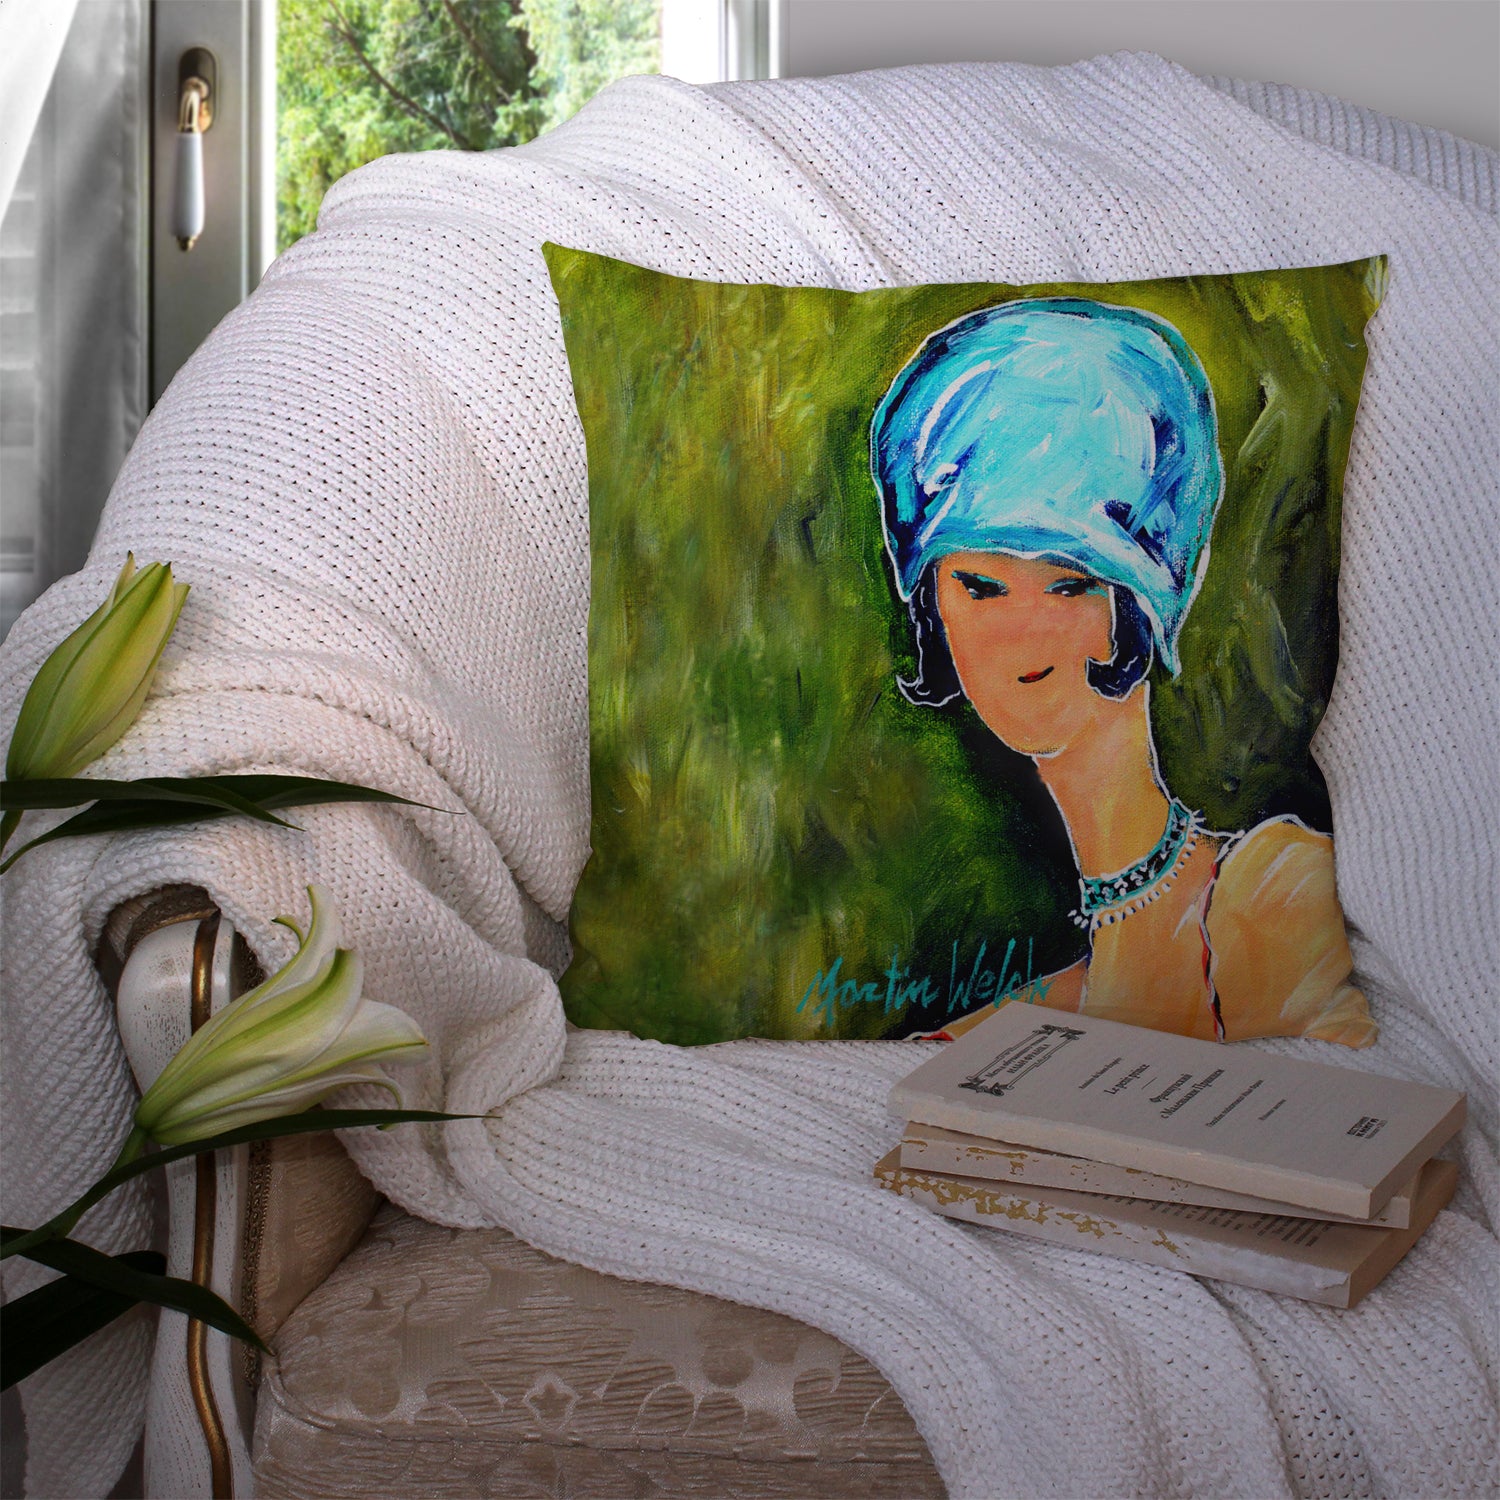 Young Voncile Still in High School Fabric Decorative Pillow MW1363PW1414 - the-store.com